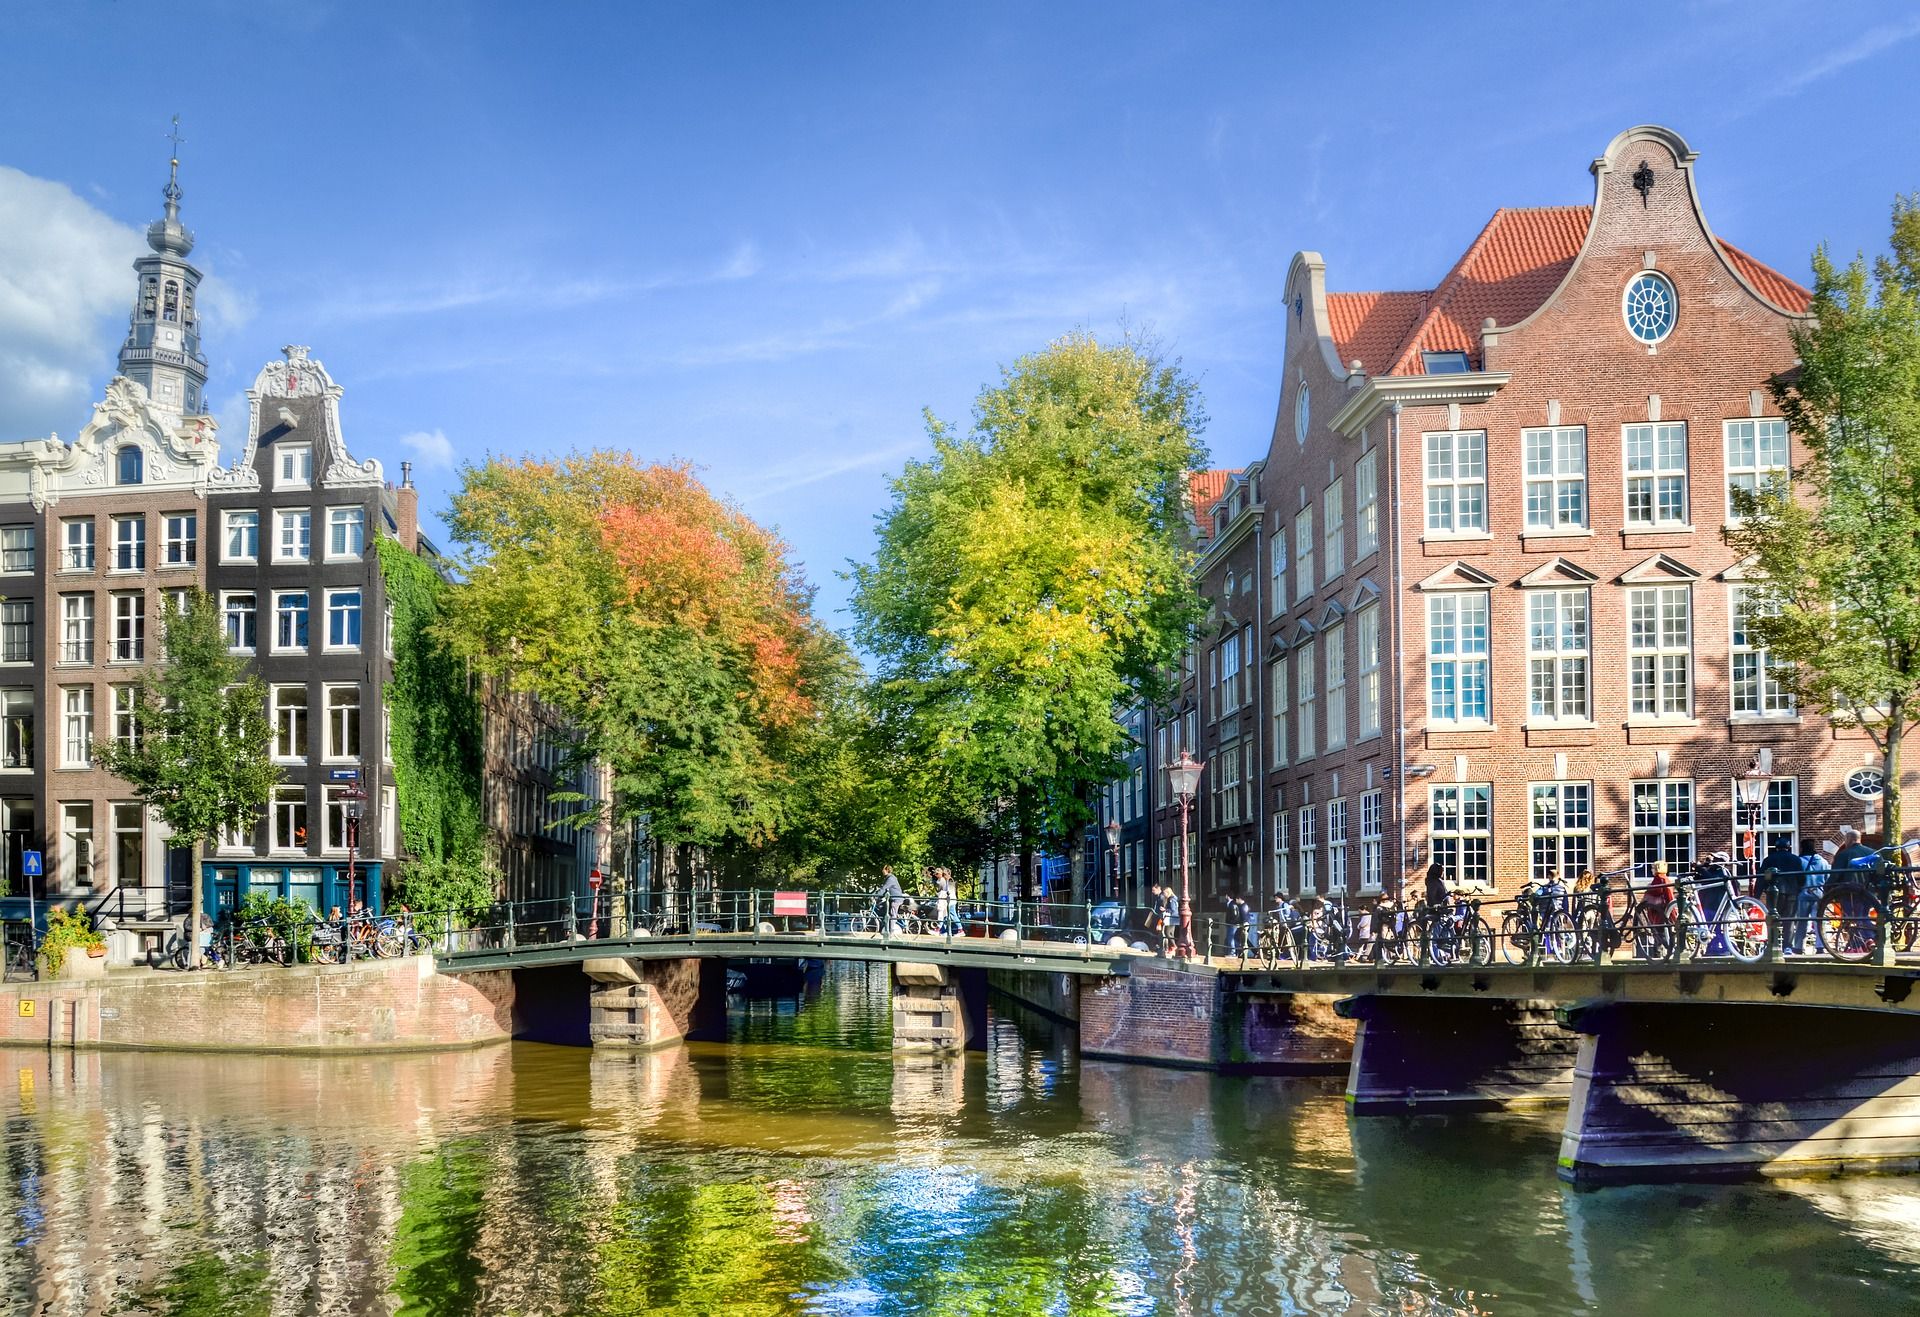 A canal in Amsterdam, Netherlands